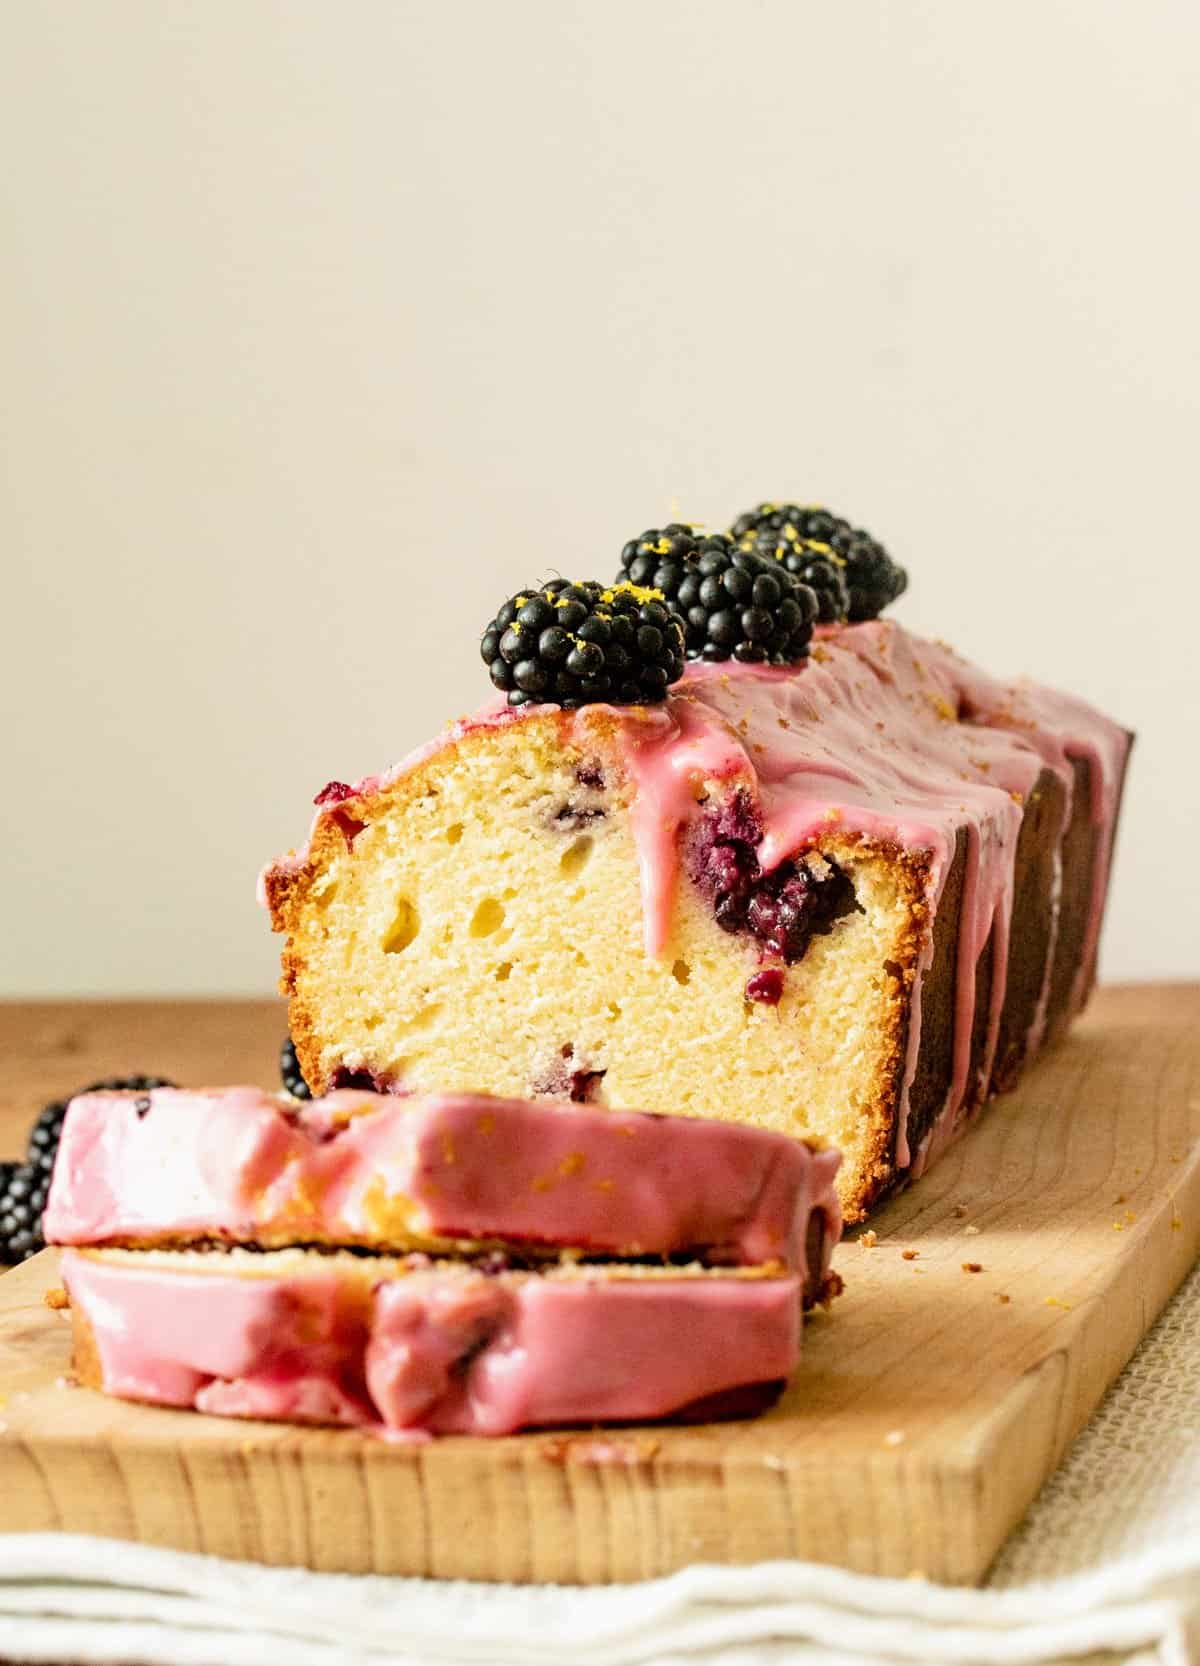 Cut slices and whole blackberry loaf on wooden board, beige background.